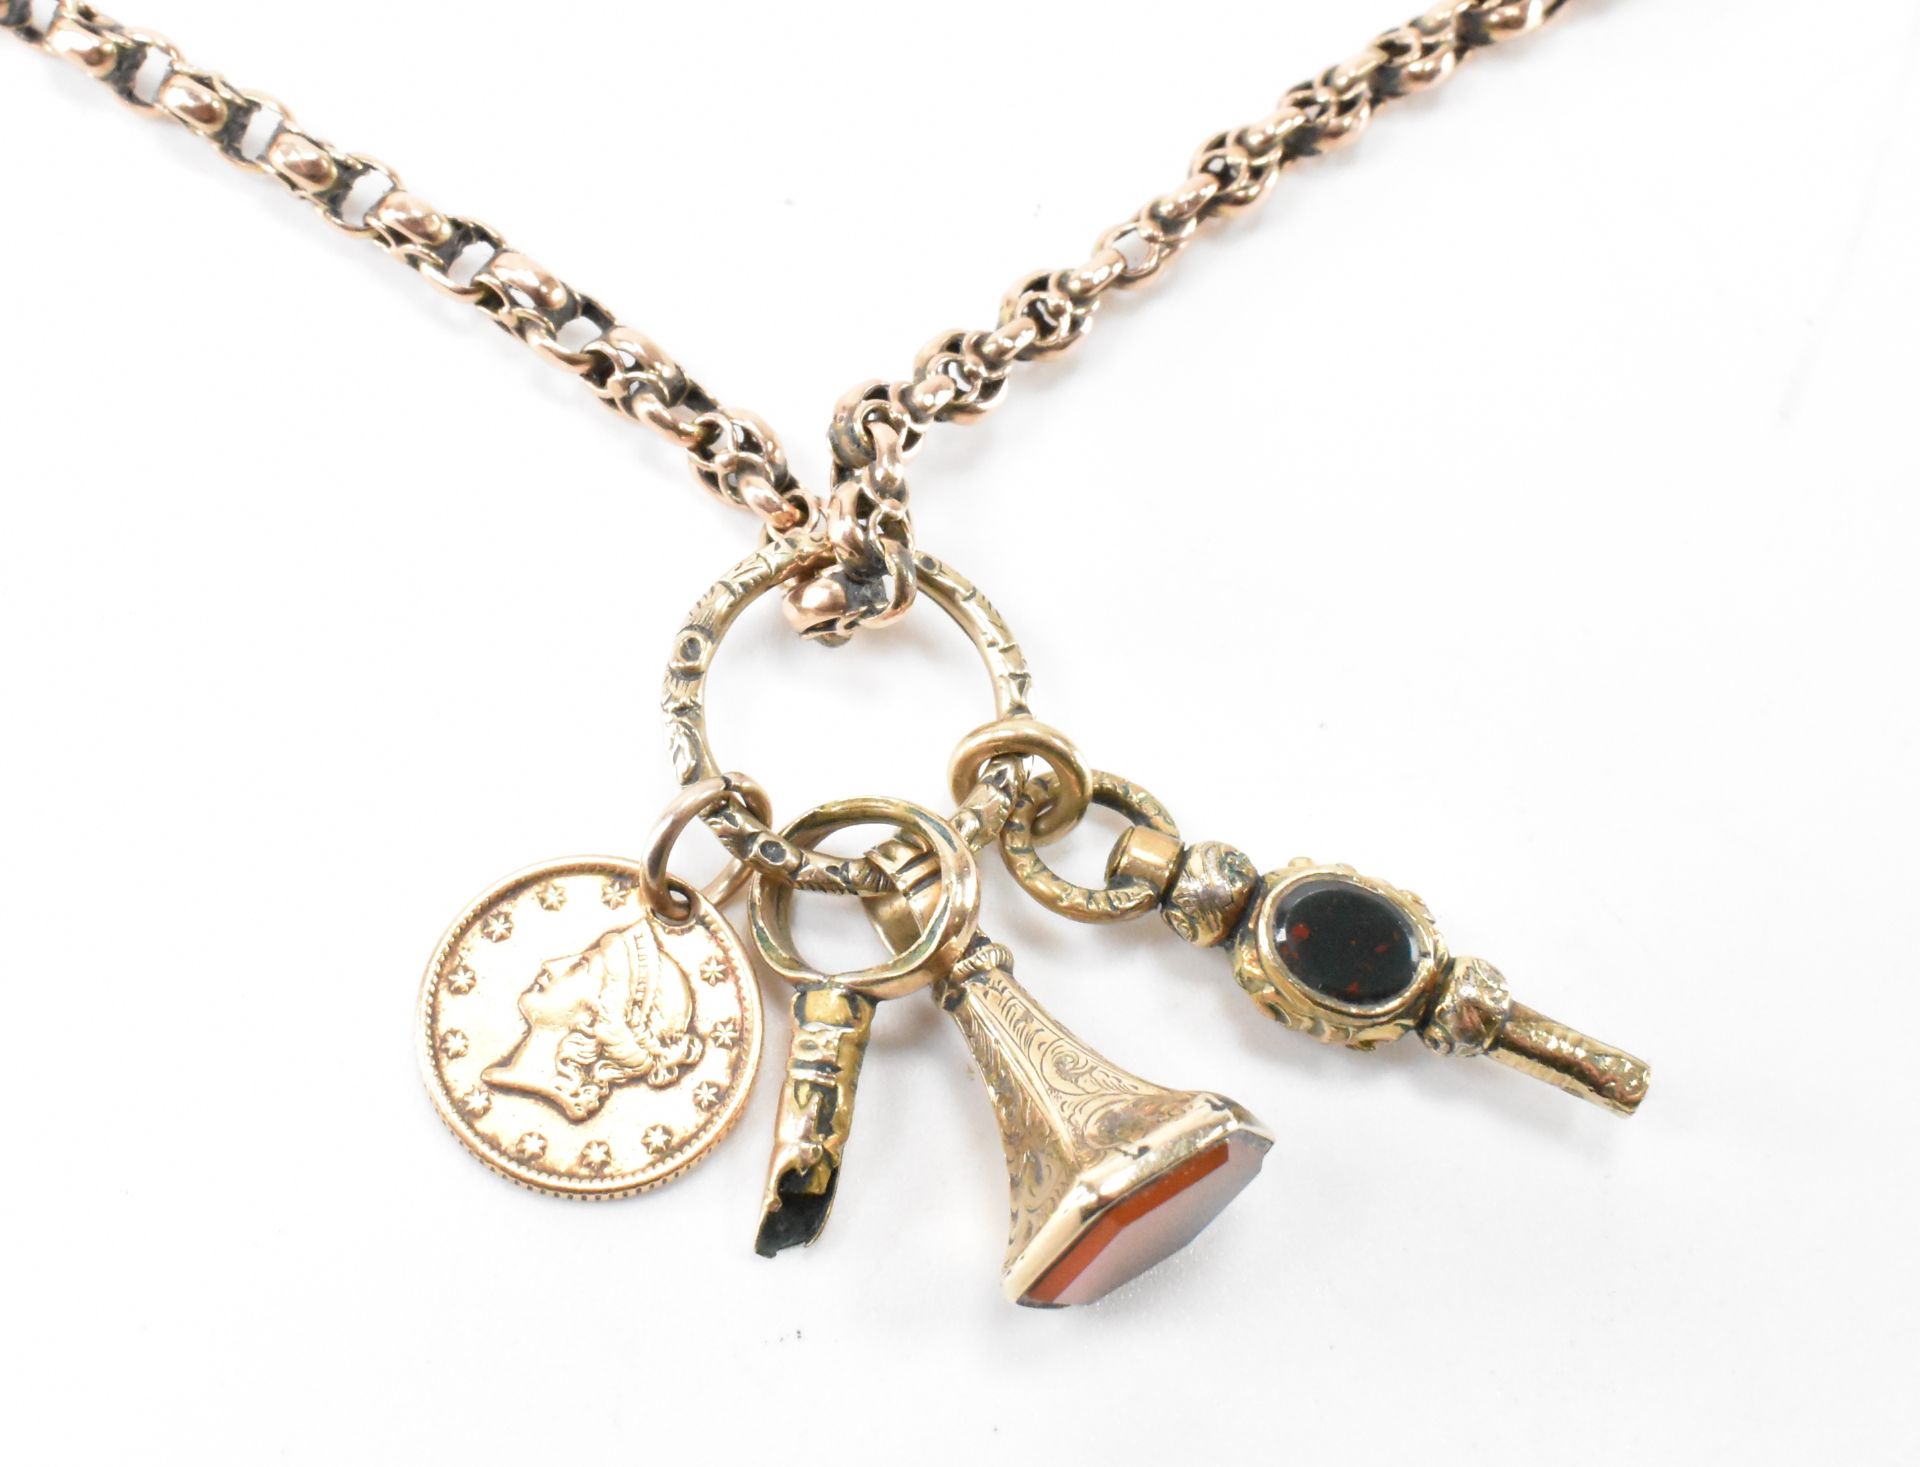 VICTORIAN POCKET WATCH CHAIN NECKLACE - Image 3 of 6